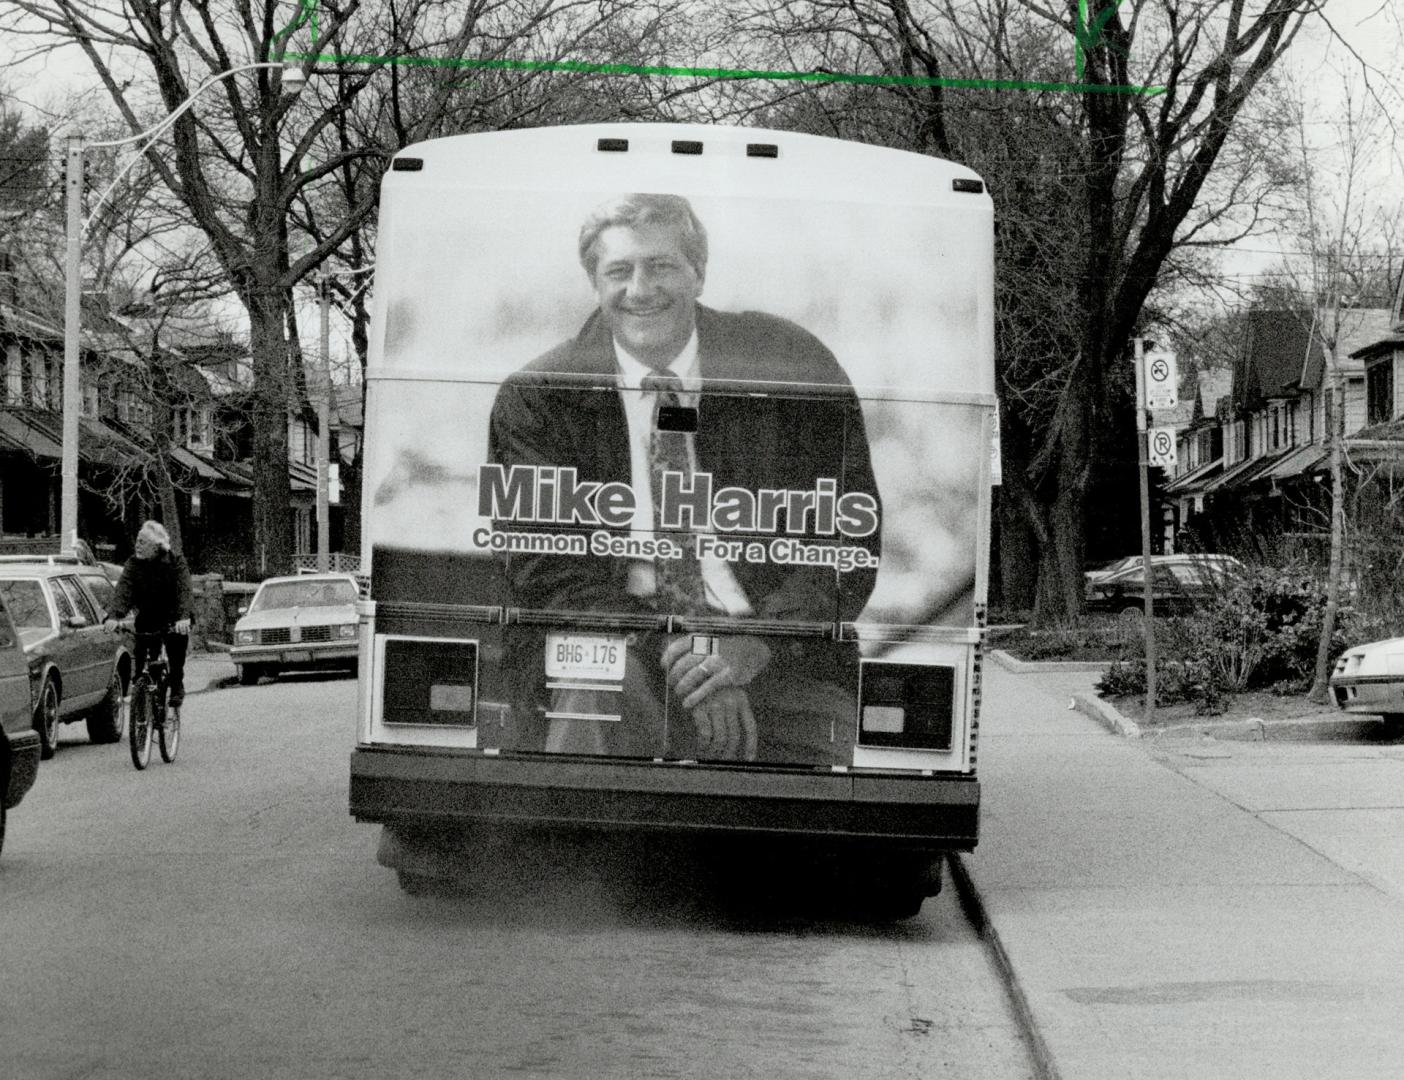 Harris, Mike - Election Campaign - 1995